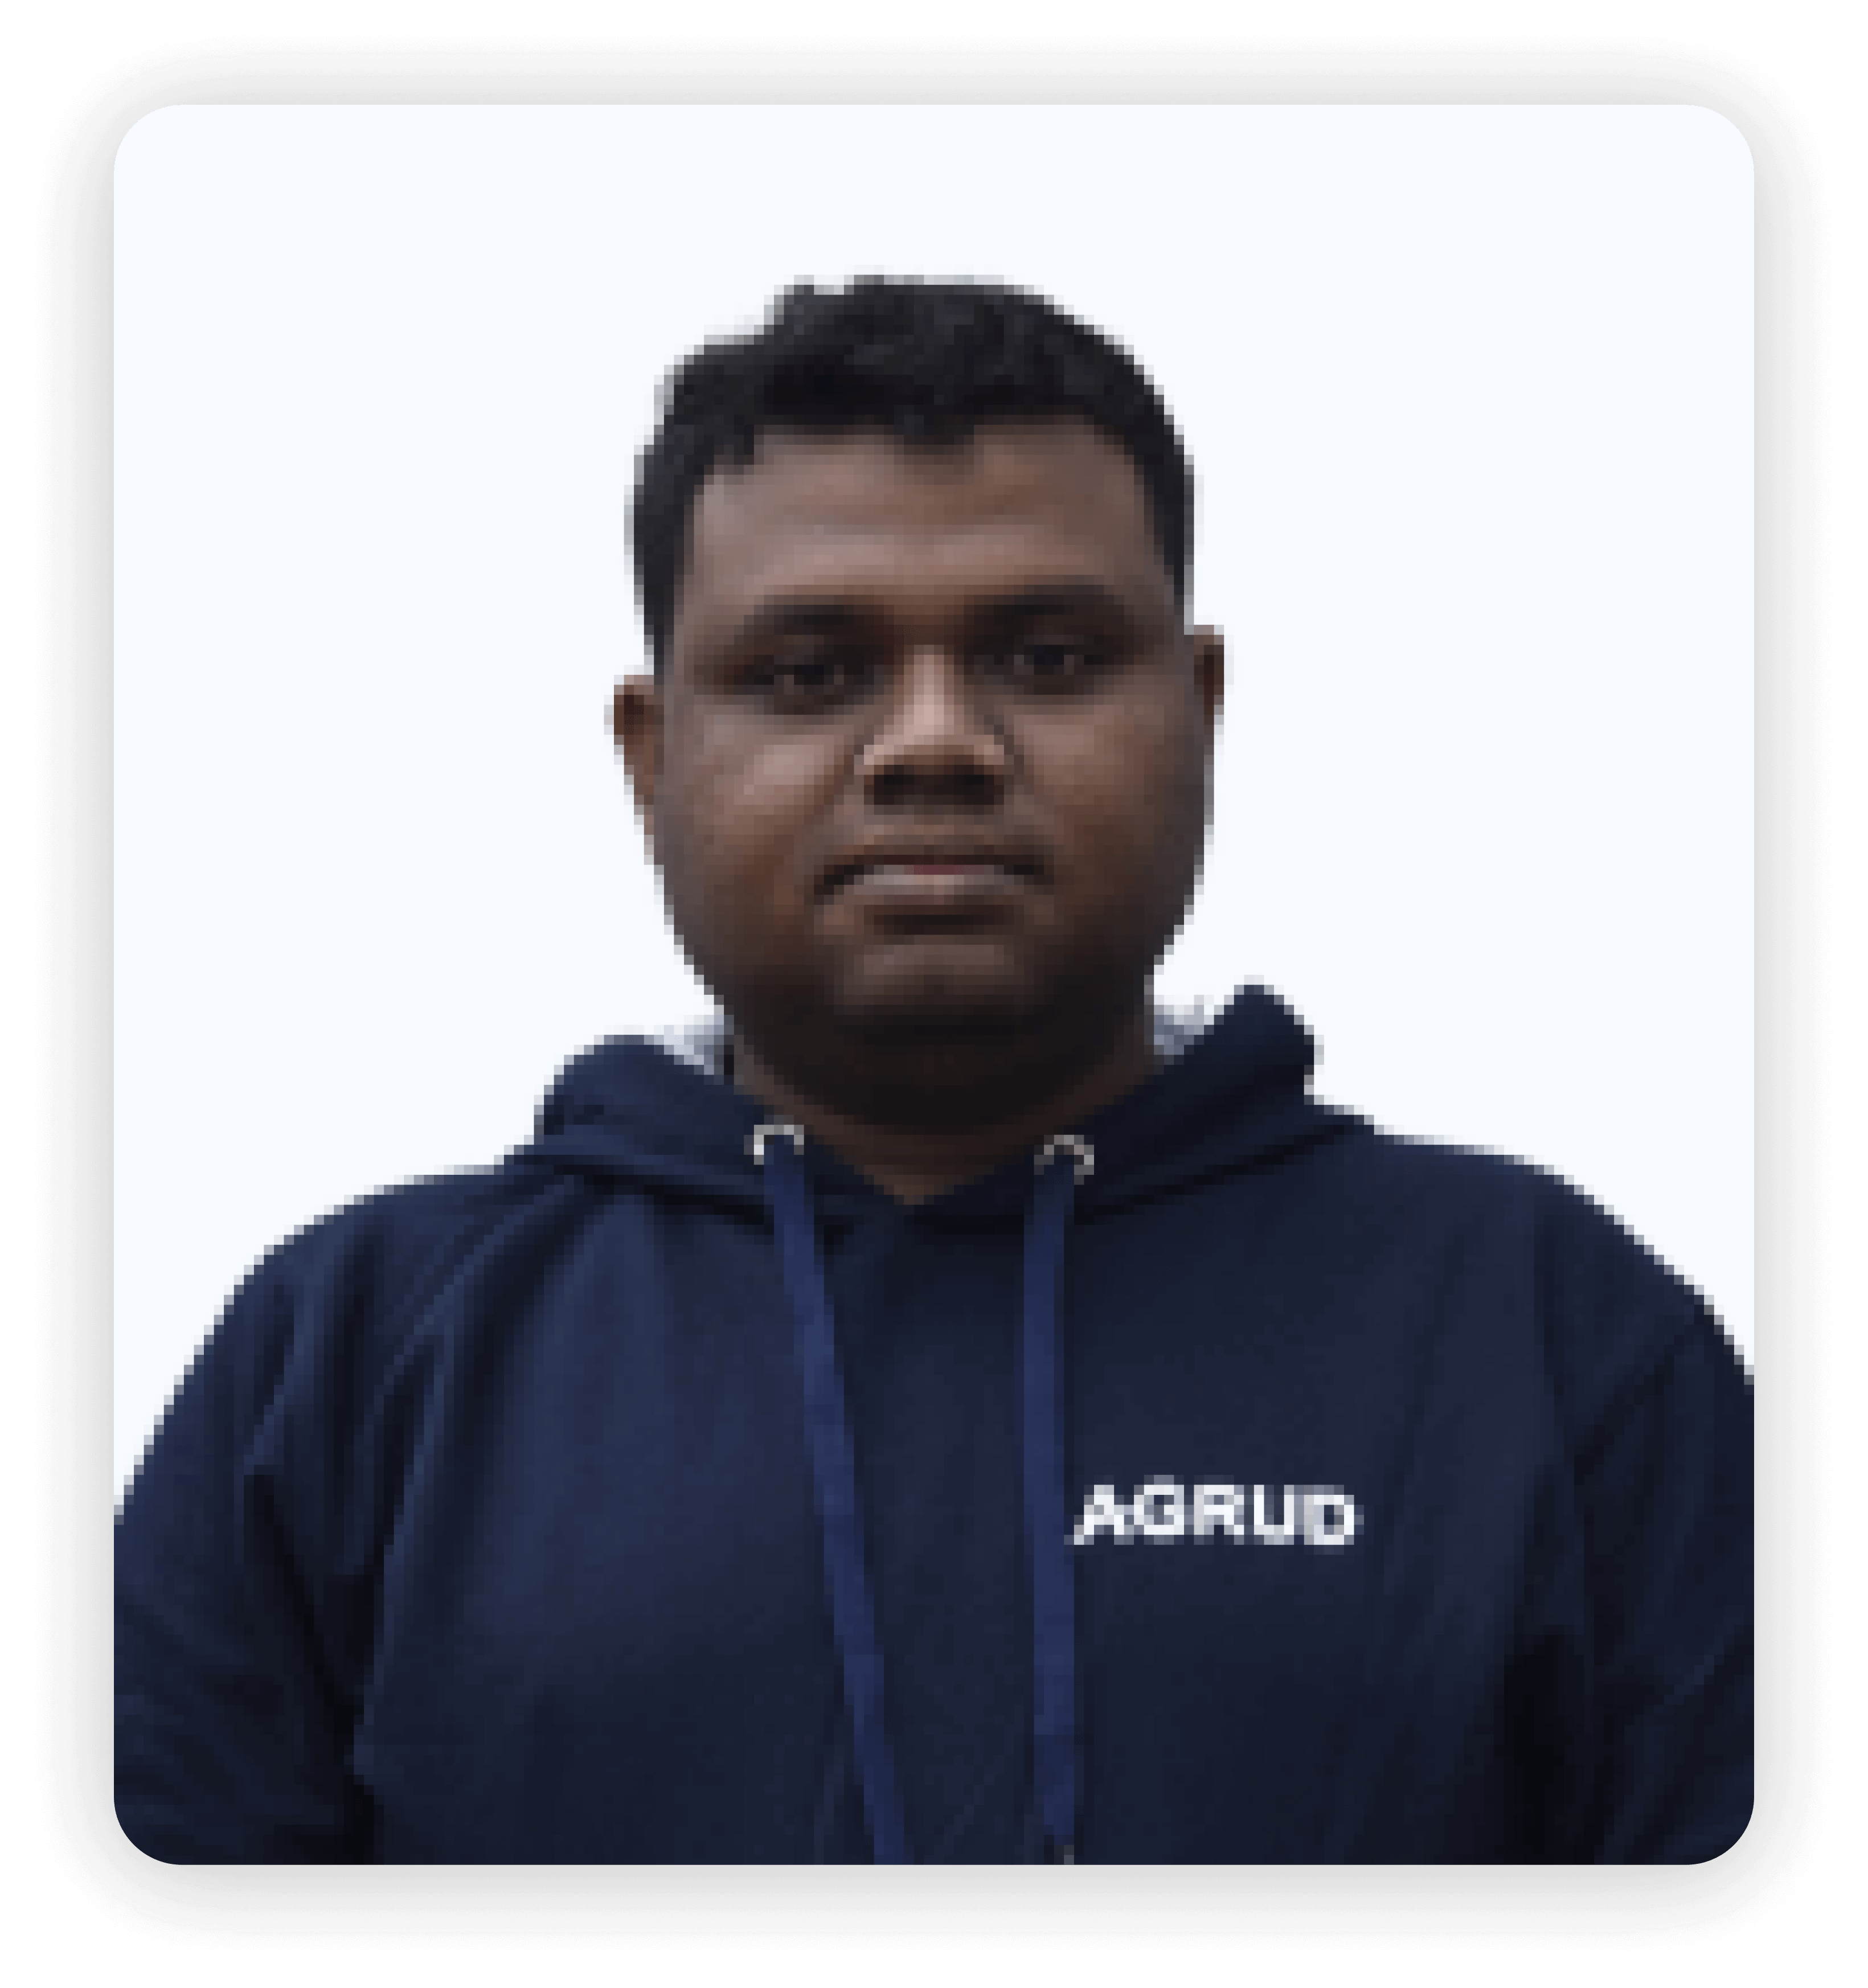 Sumanta Mondal - Research Analyst at Agrud Technologies